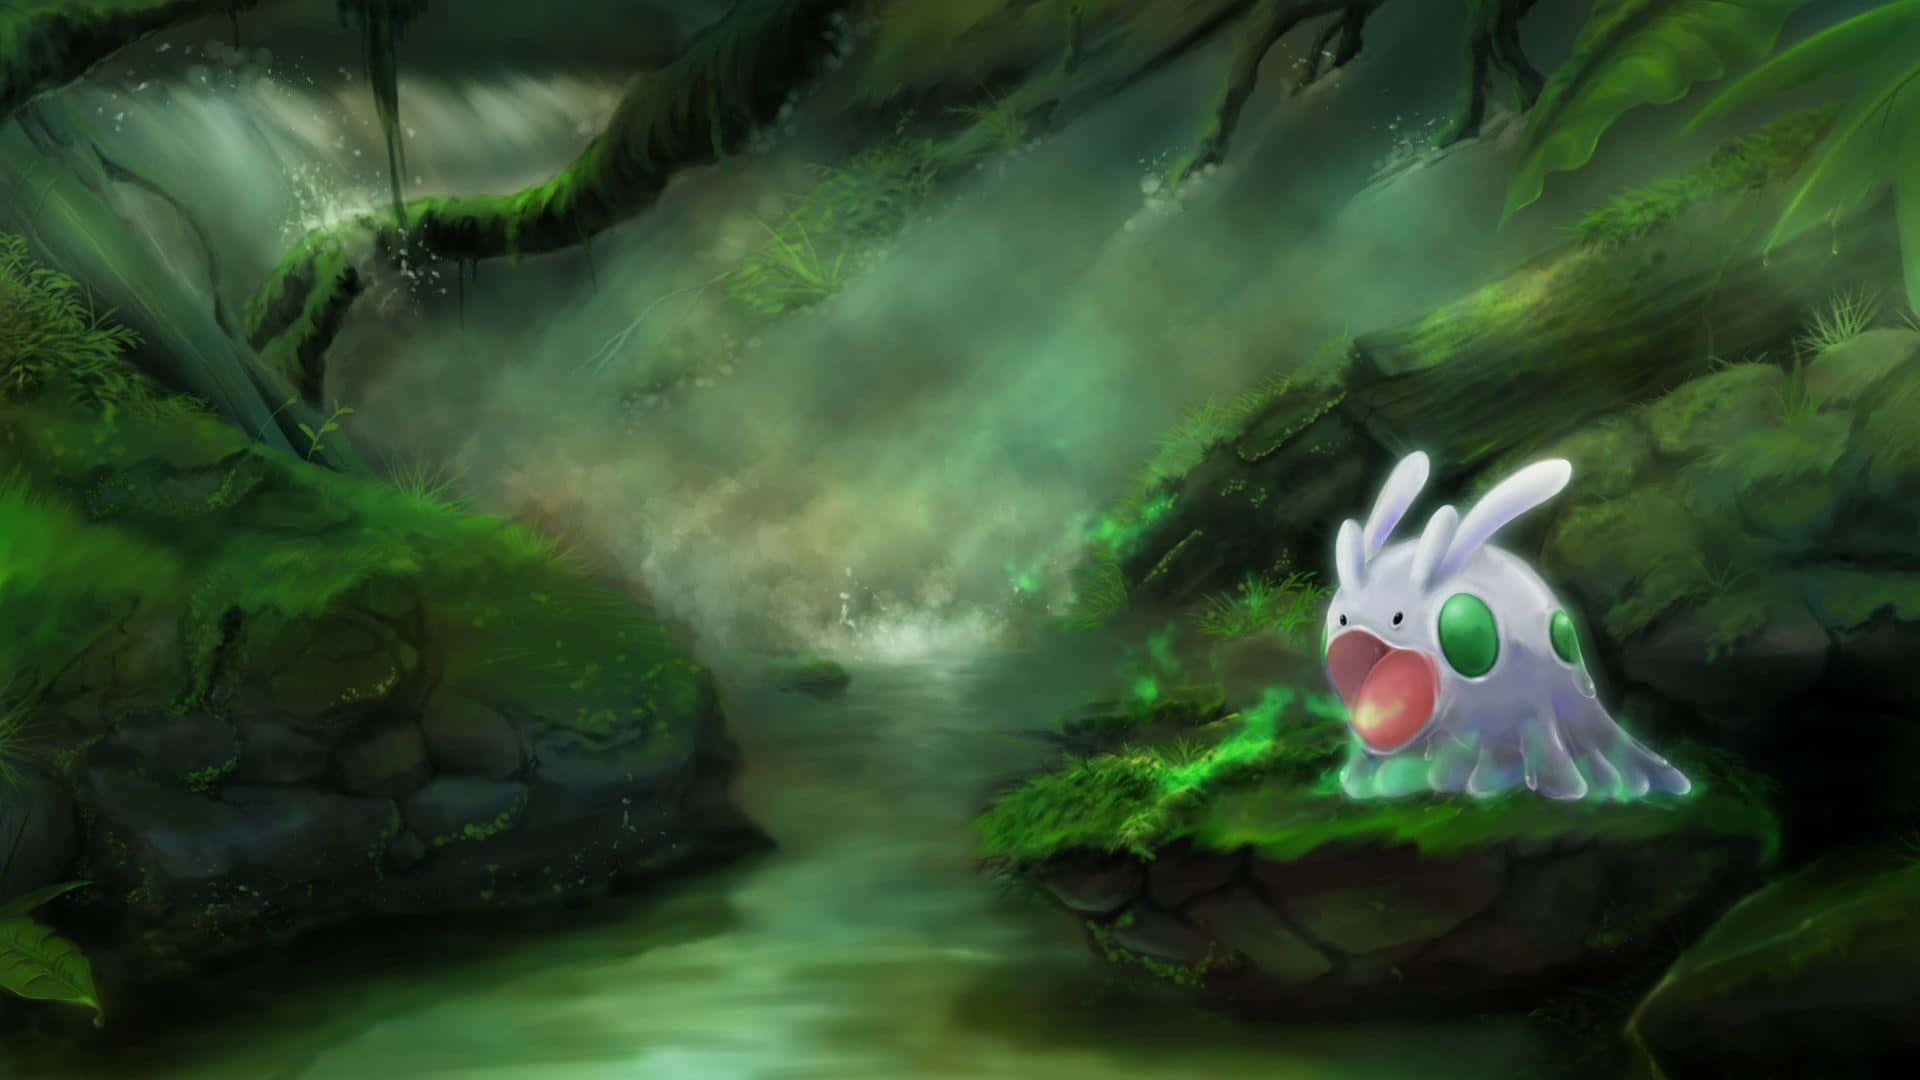 Goomy In A Green Forest Wallpaper